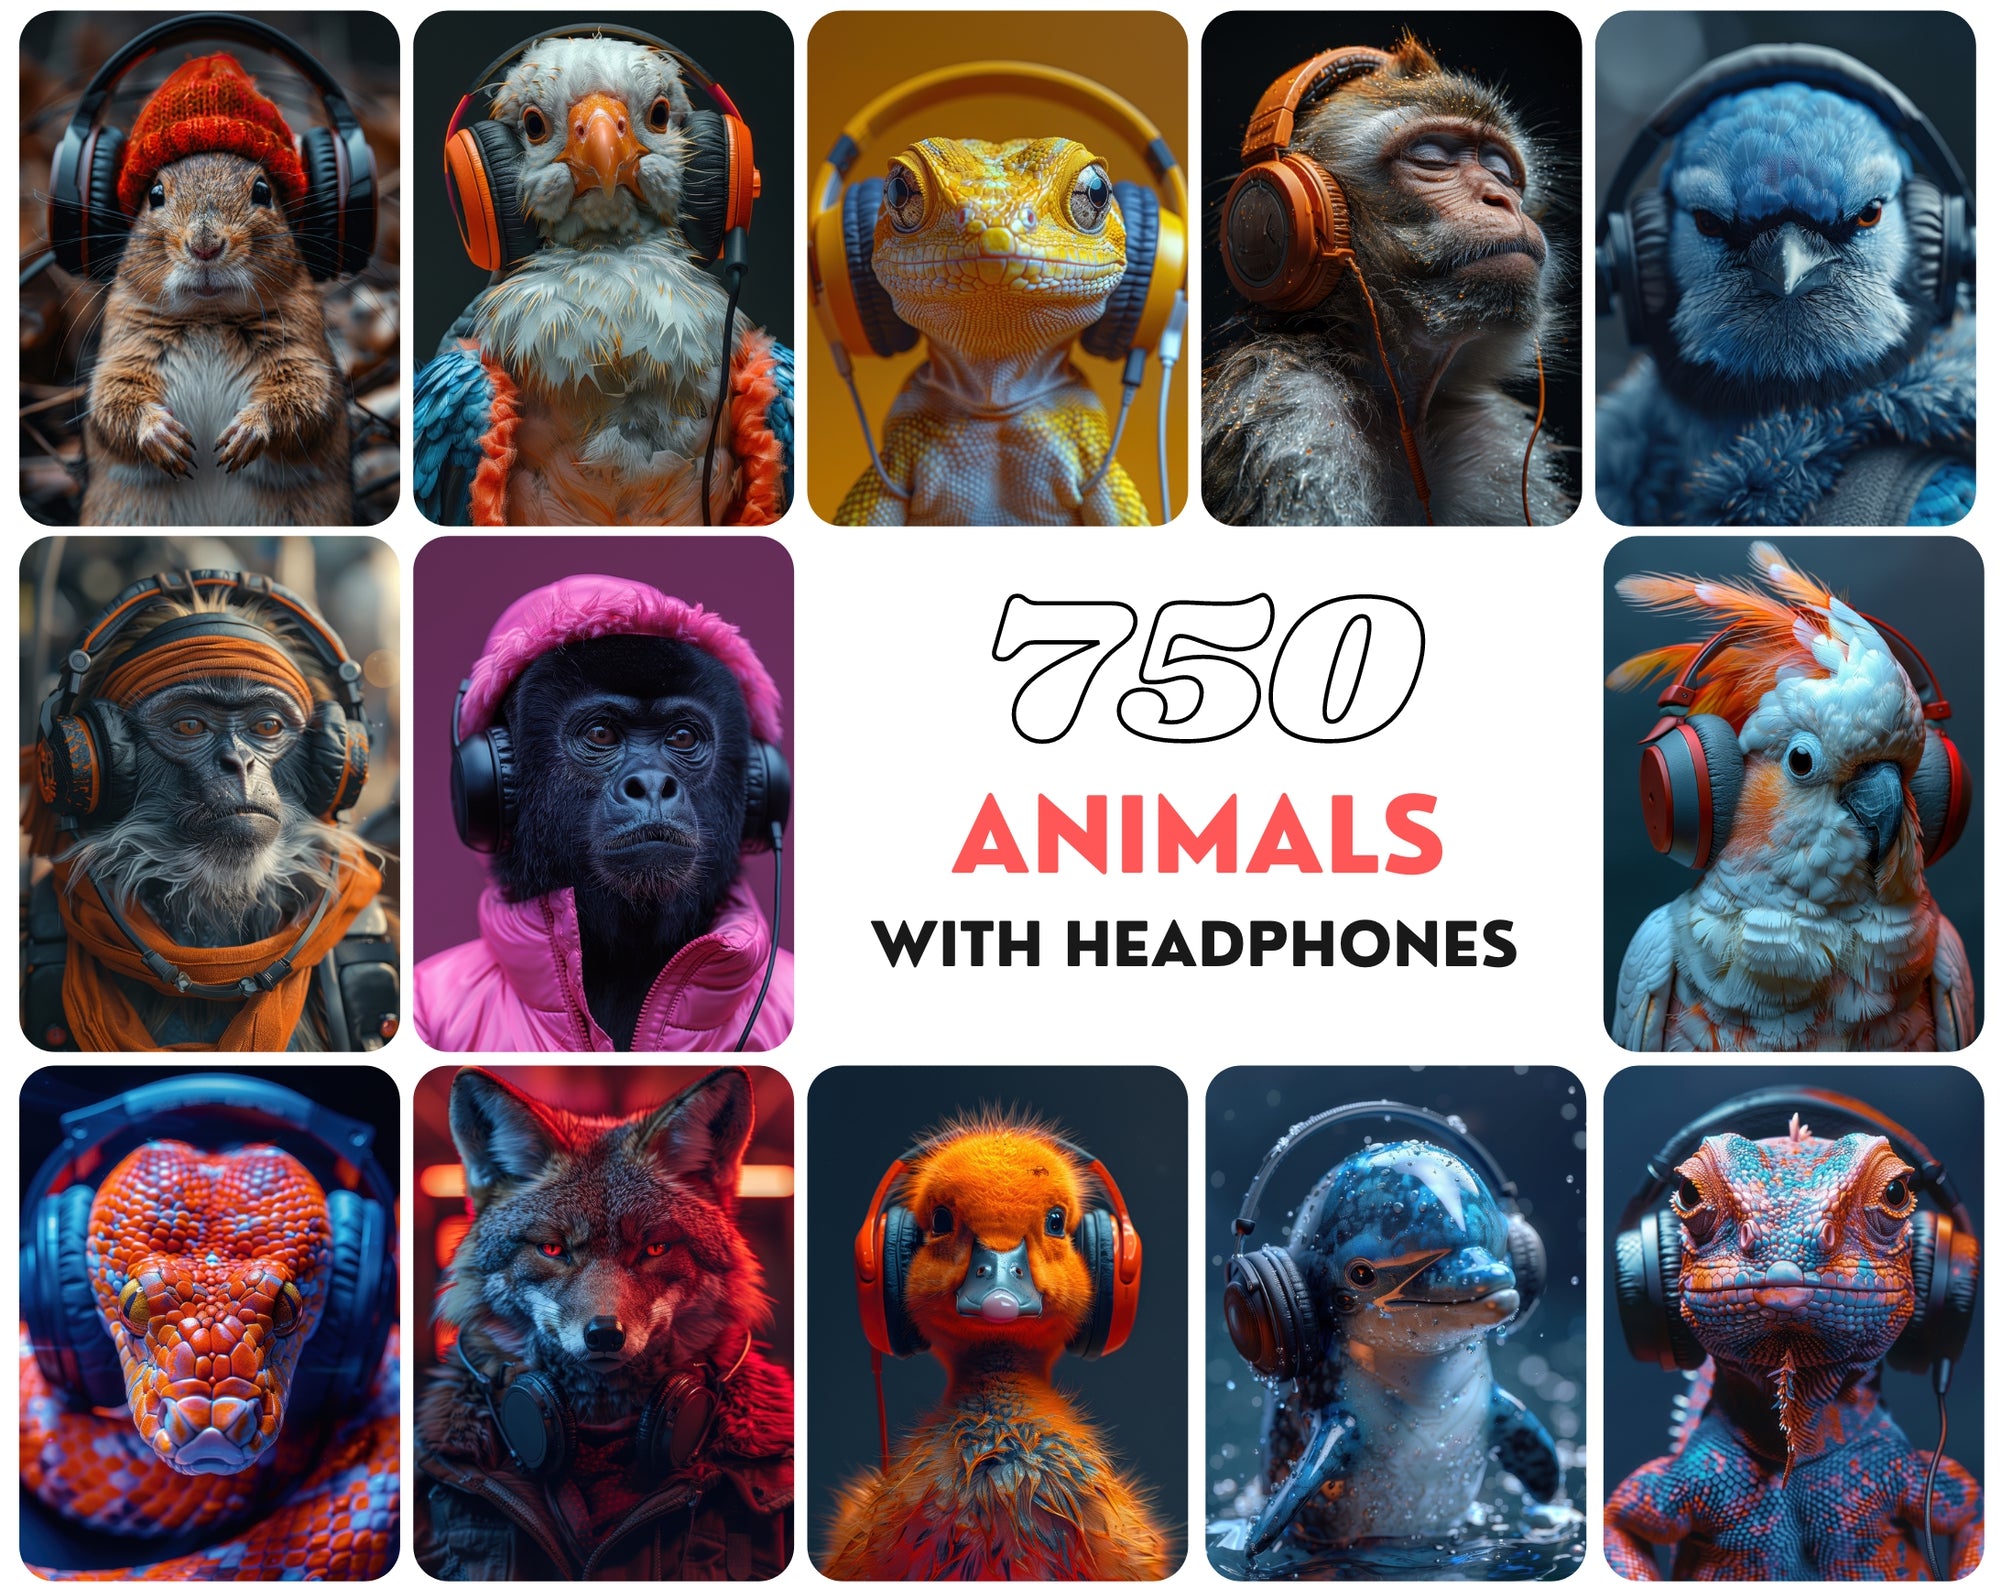 Colorful Animal Art with Headphones | 750 High-Resolution JPG Images | Commercial License Included